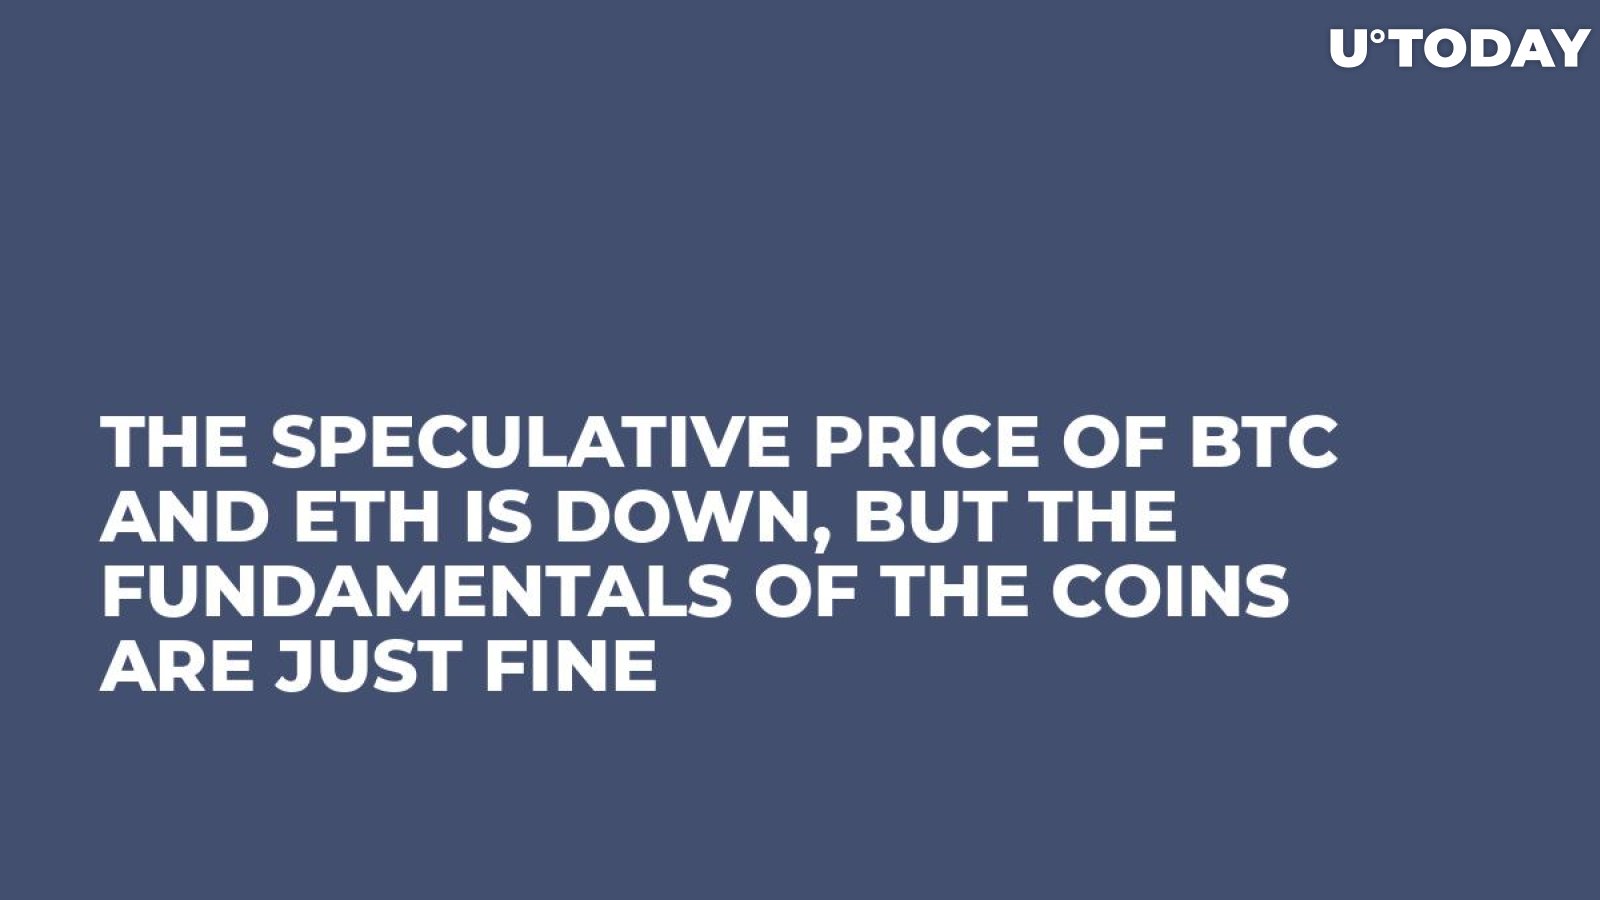 The Speculative Price of BTC and ETH is Down, But the Fundamentals of the Coins are Just Fine